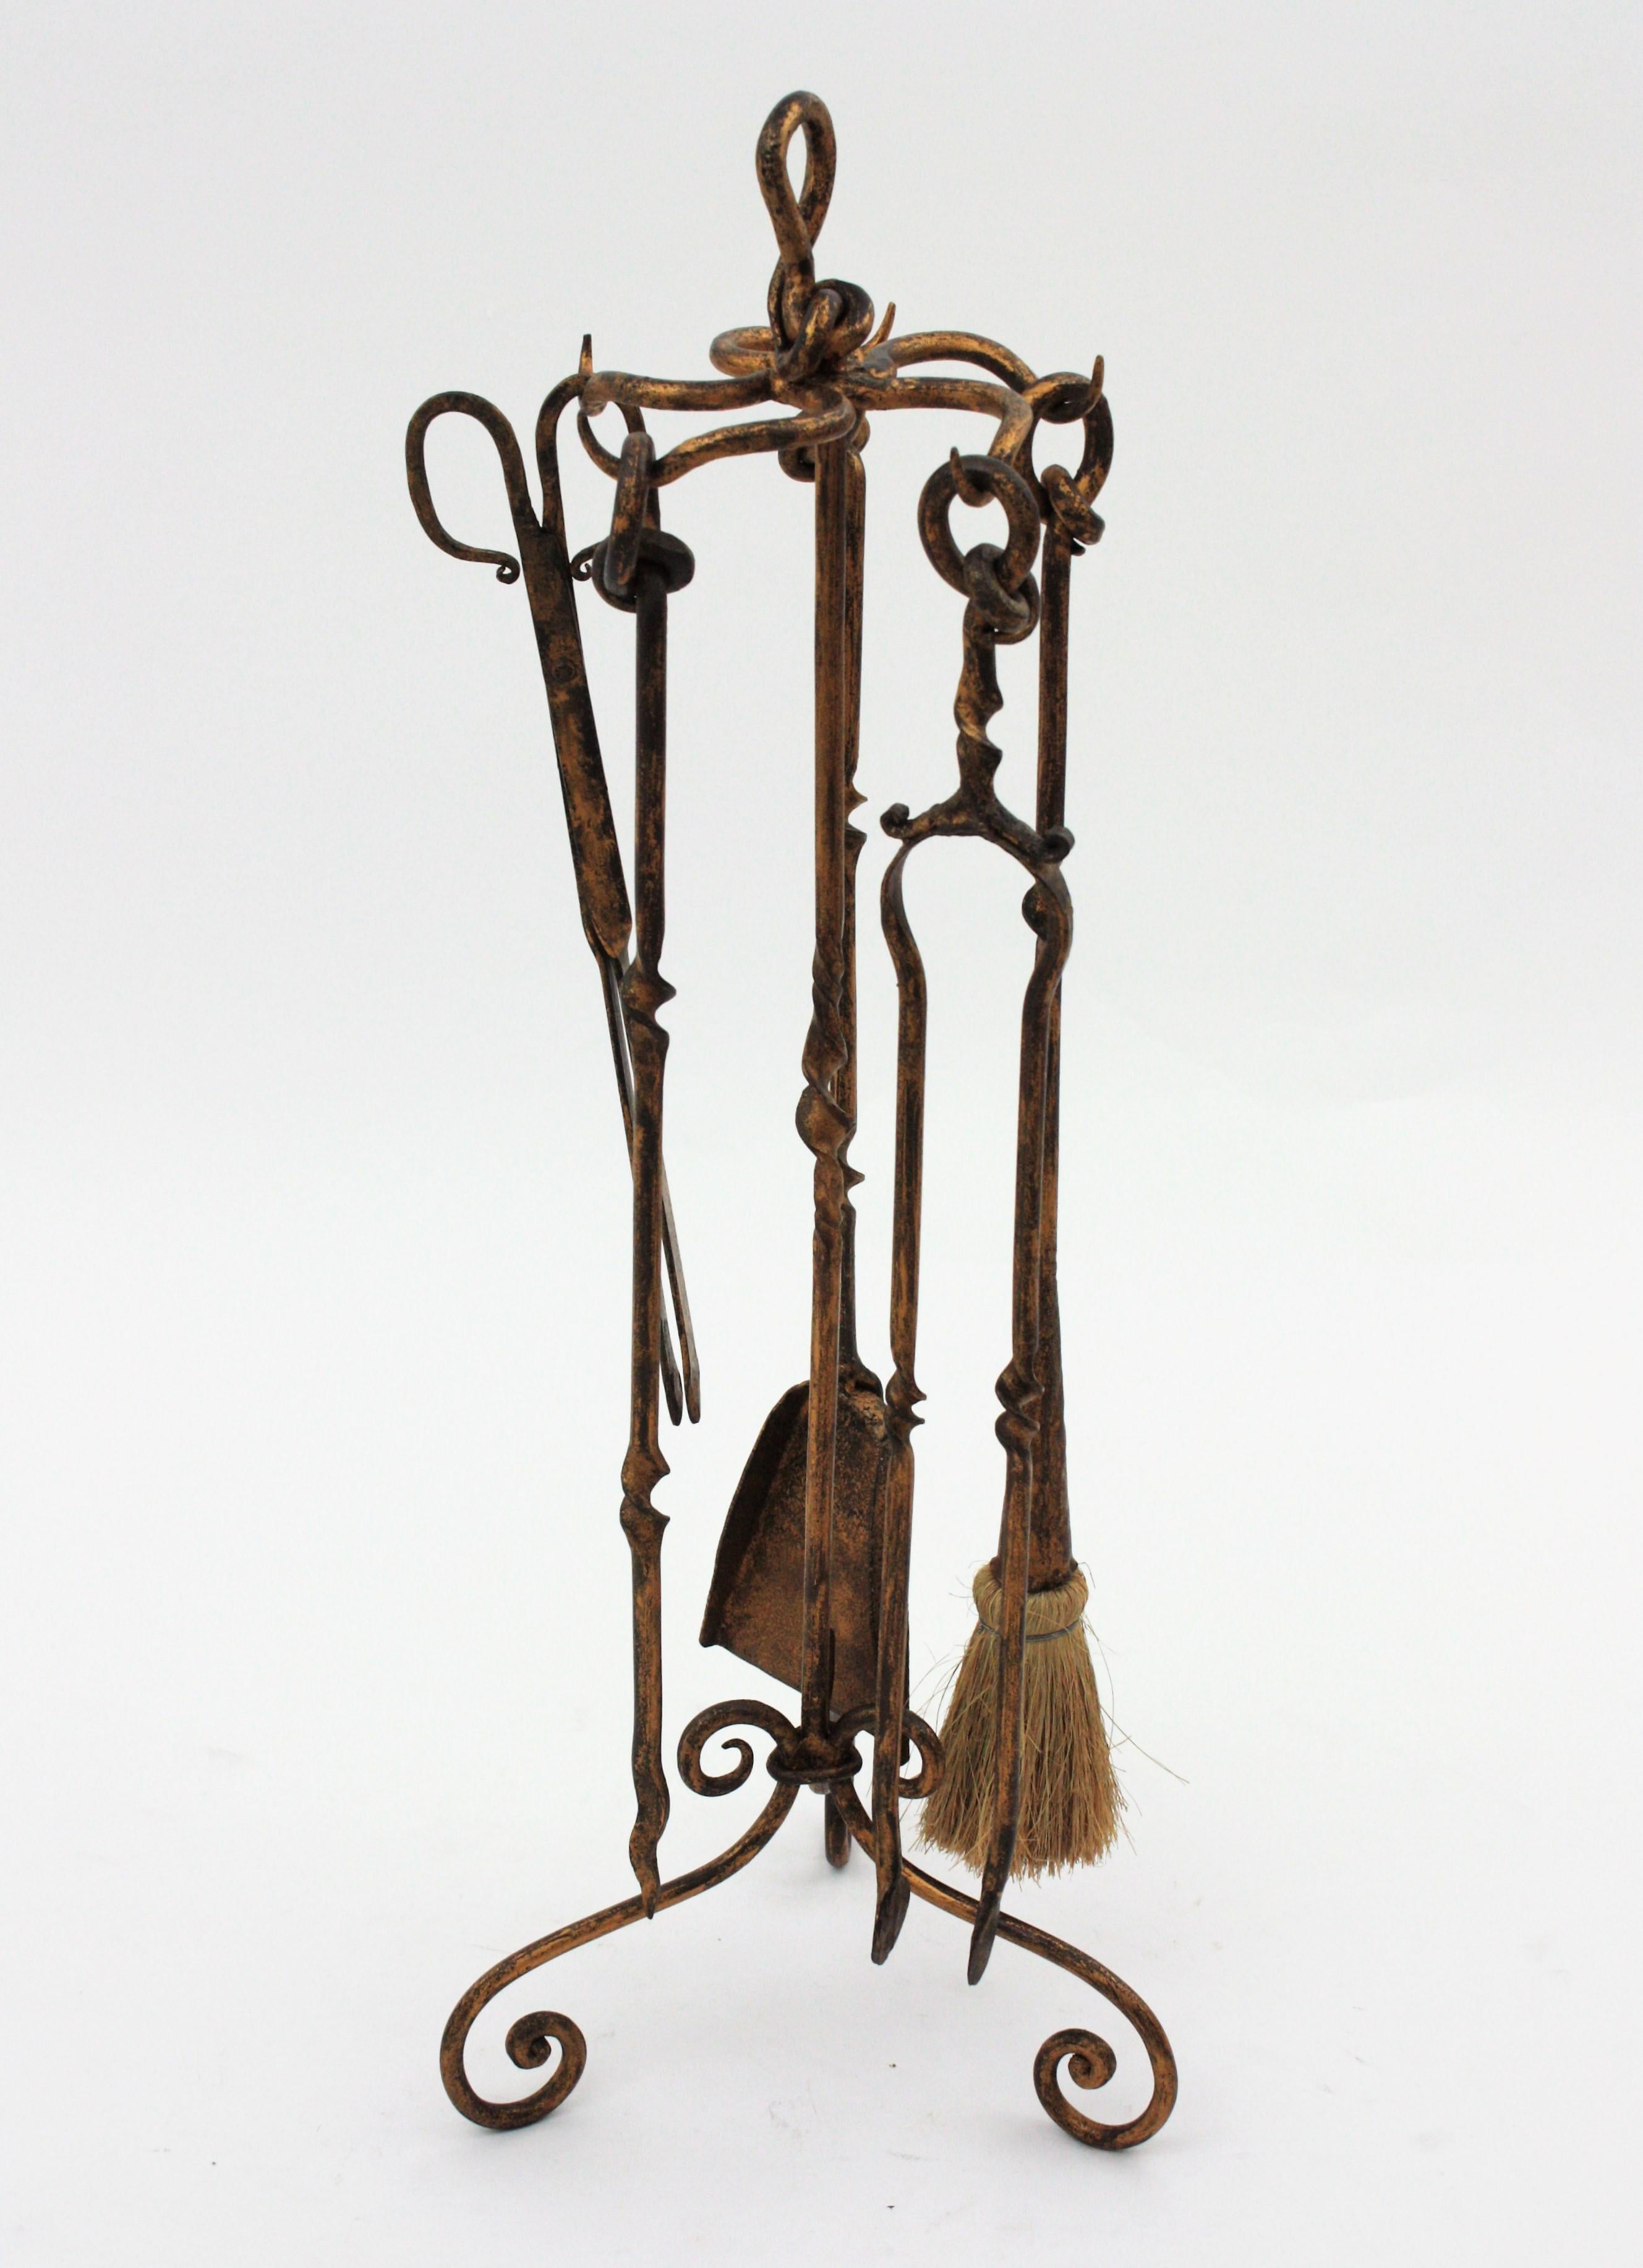 Beautiful Hand forged knot fireplace tool set on stand. Spain, 1950s-1960s
The set includes five hand forged iron tools : a shovel, a log poker, broom, and two tongs. The rack stands up on a tripod base with scrolled ended feet and a knot detail on